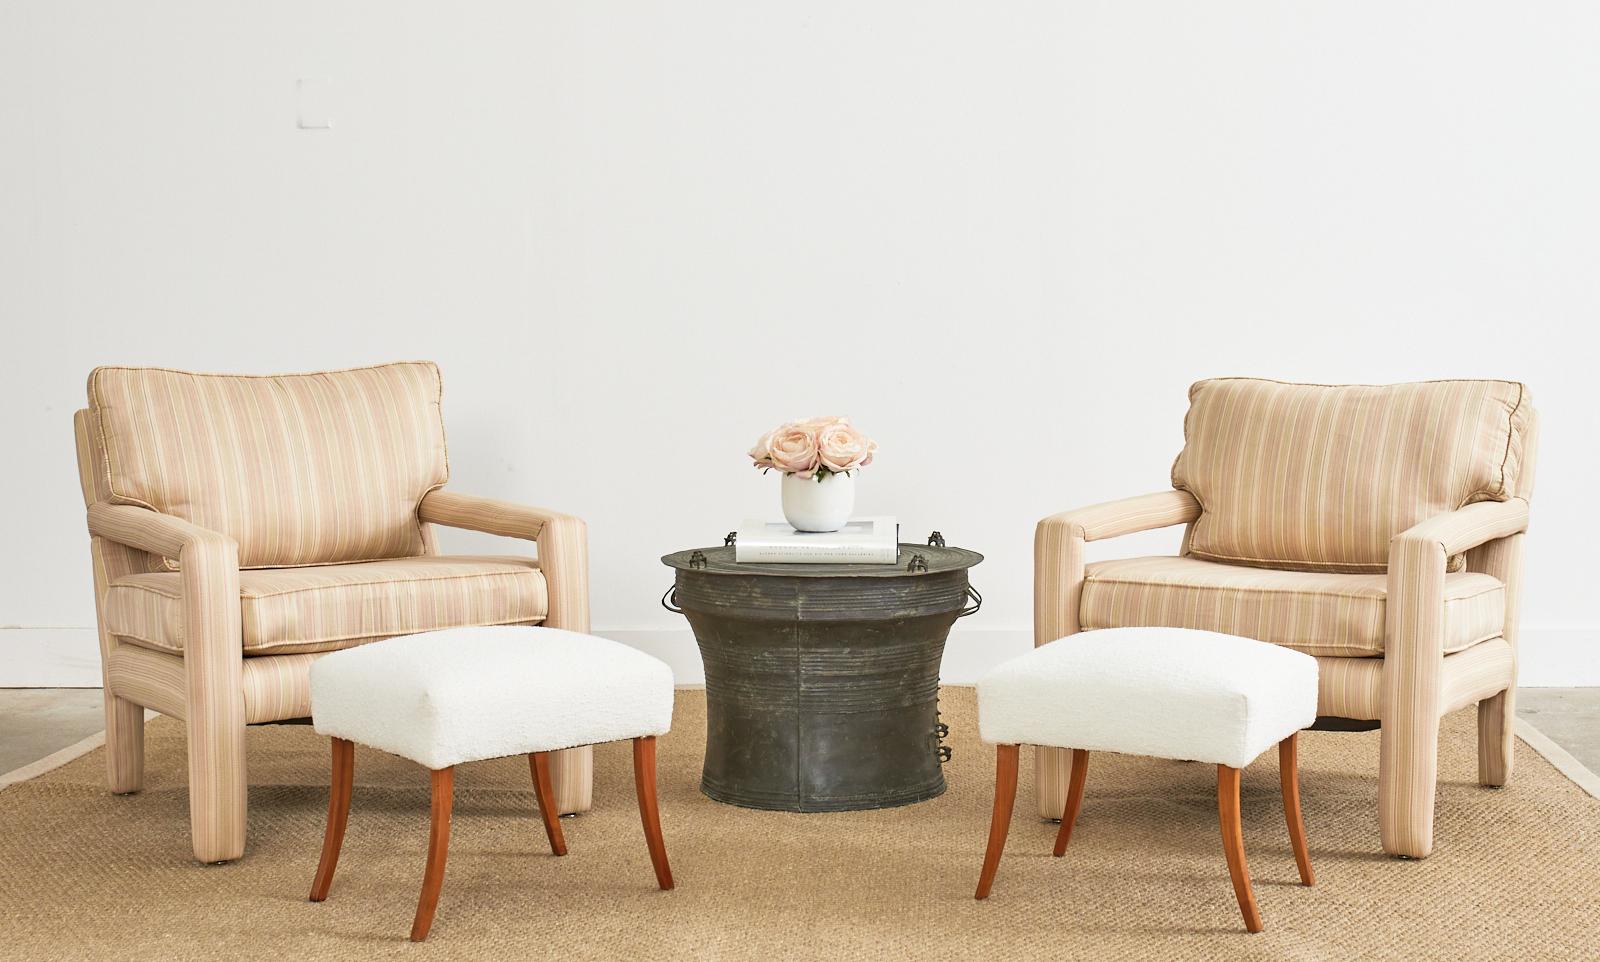 Stunning pair of Scandanavian or Danish modern style footstools featuring a white boucle upholstery. The footstools or footrests feature a wooden frame supported by splayed saber legs giving the stools a whimsical look. Beautifully crafted with good